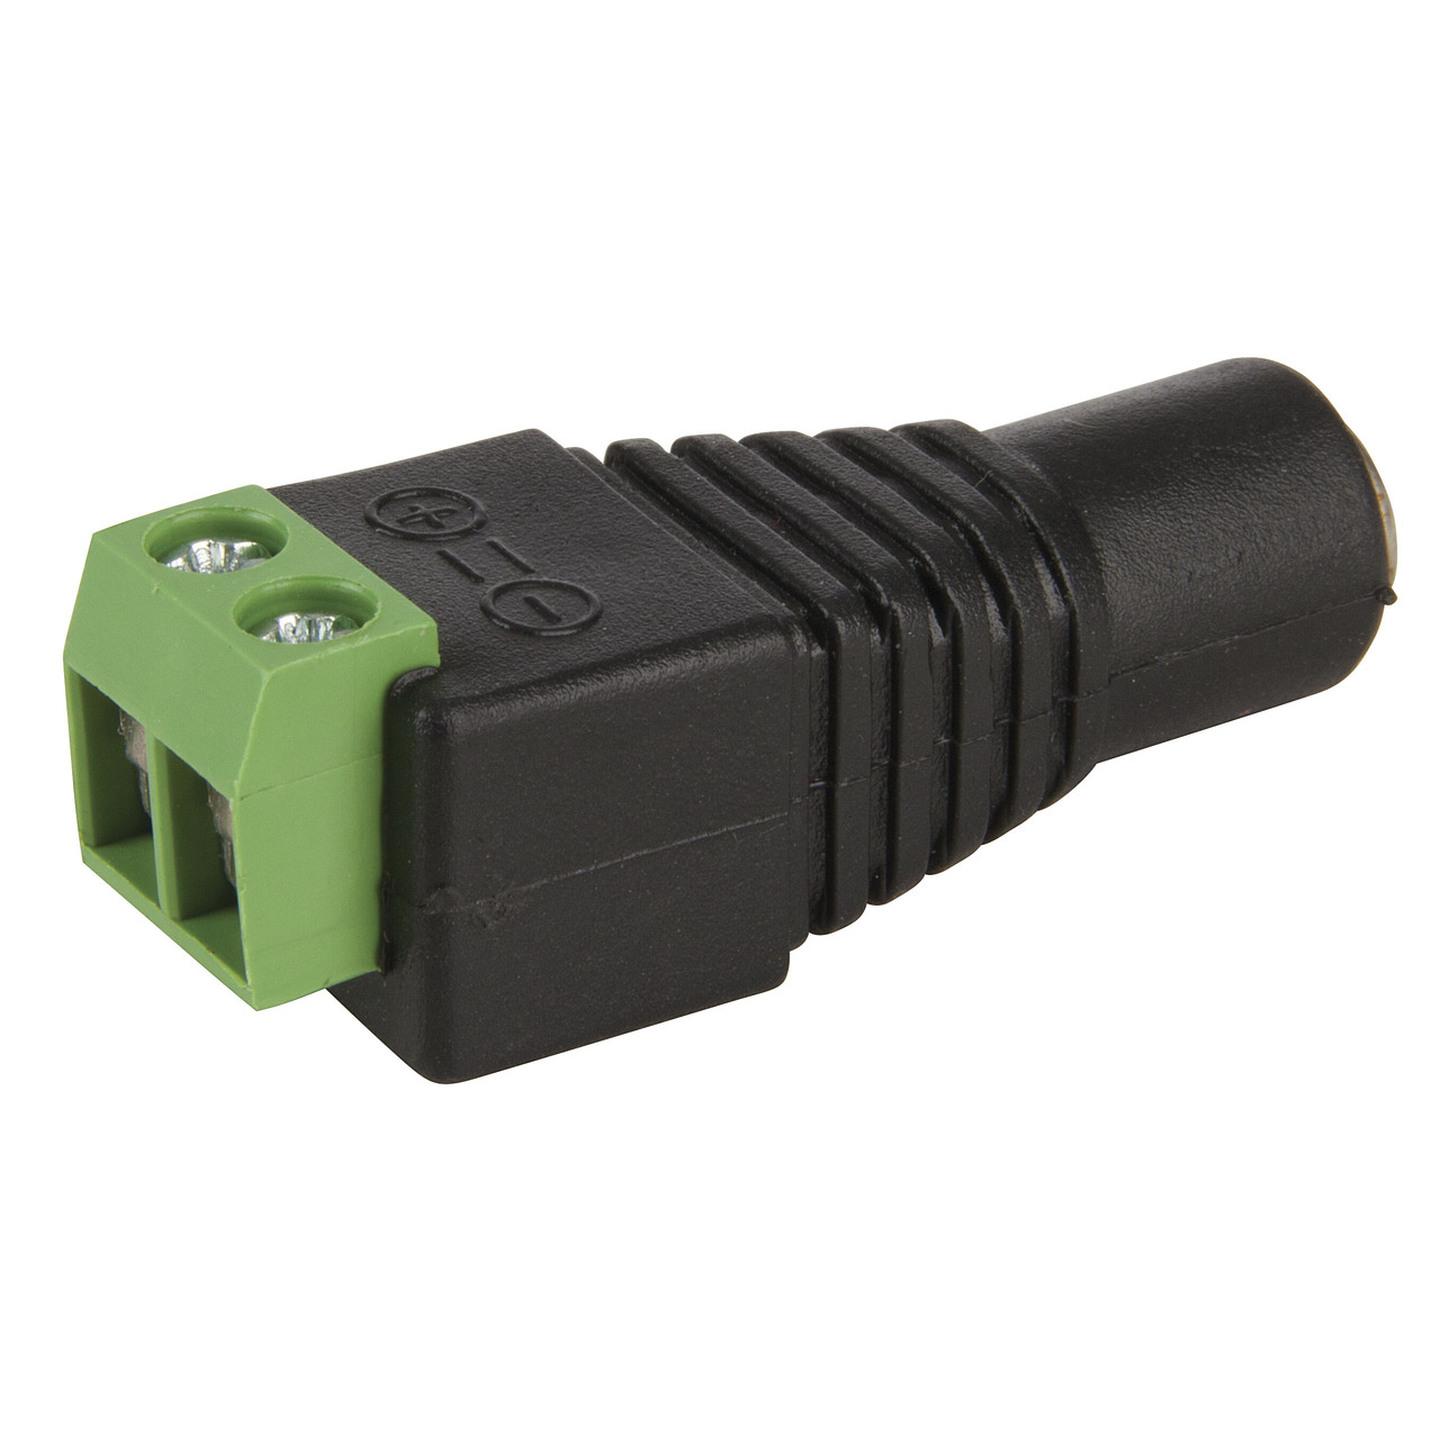 2.1mm DC Socket with Screw Terminals